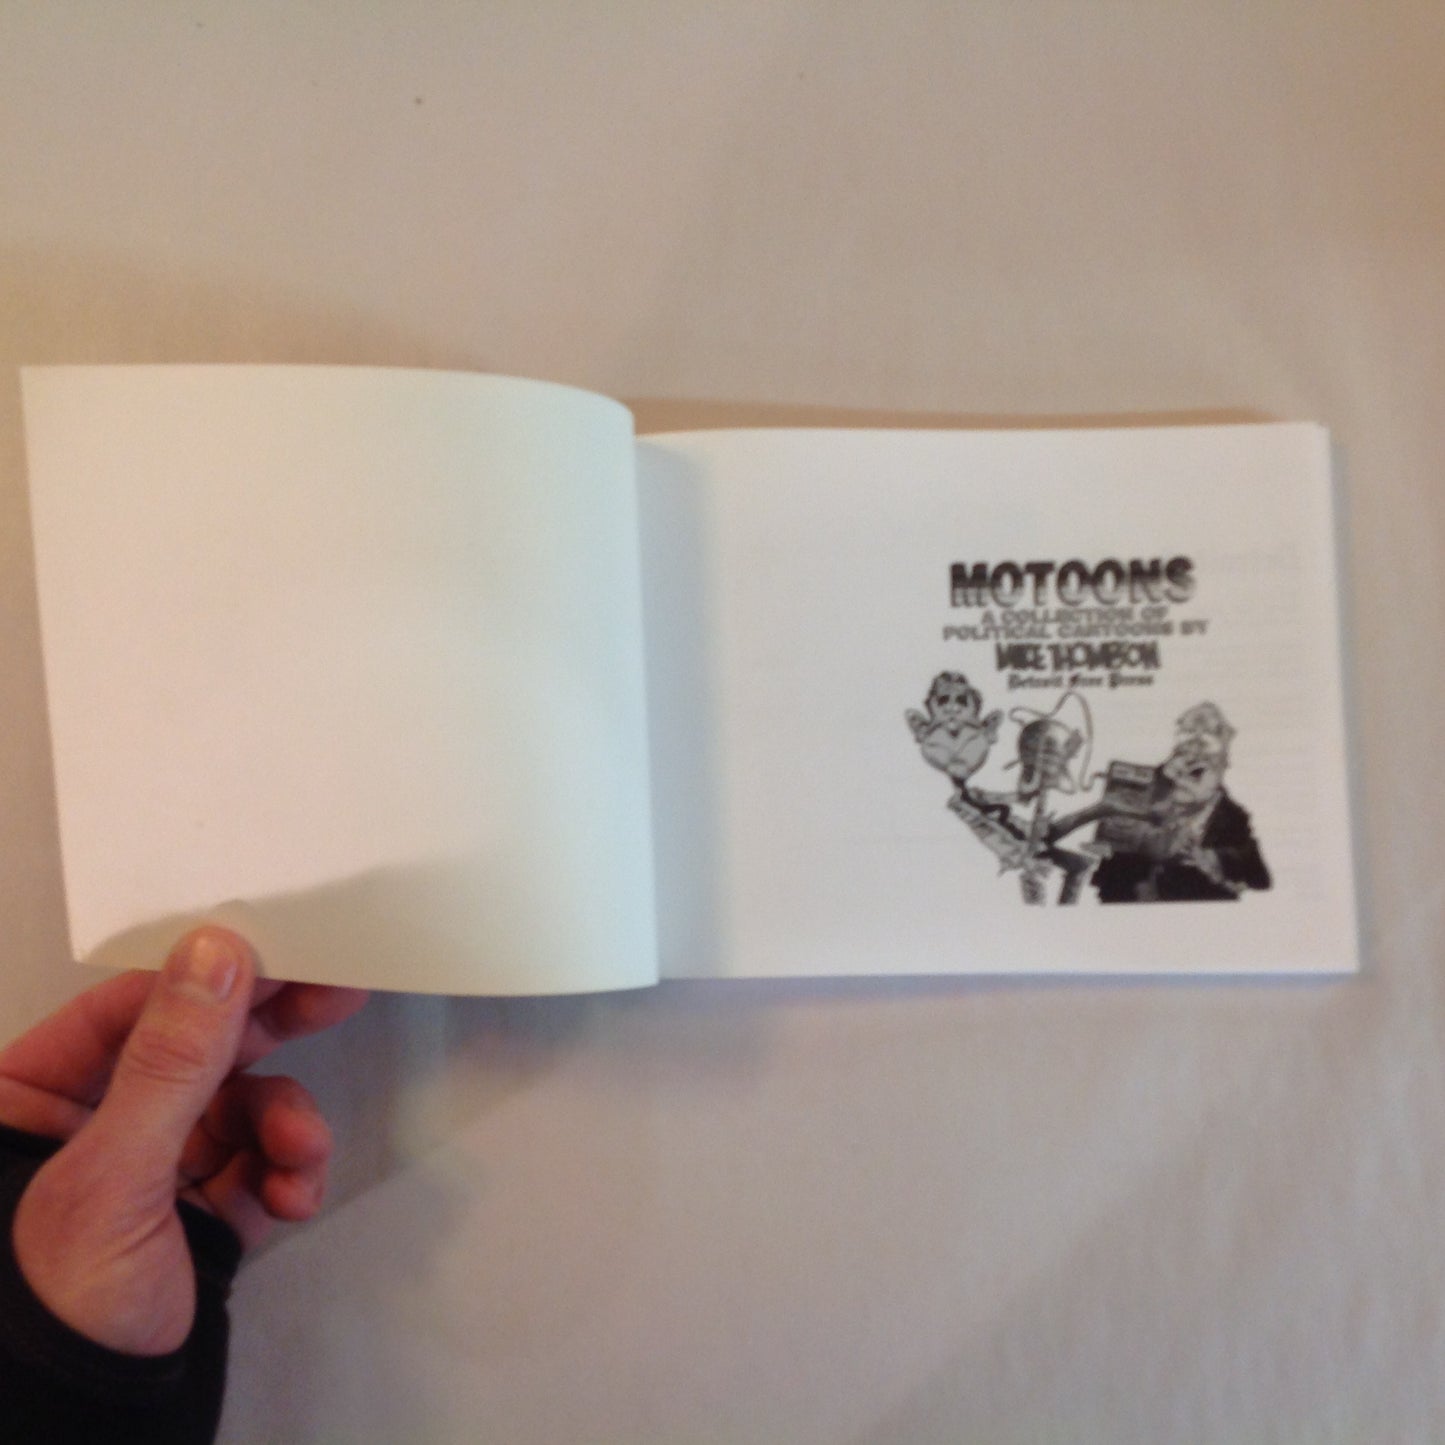 Vintage 2001 Trade Paperback MOTOONS: A Collection of Political Cartoons by Mike Thompson Detroit Free Press